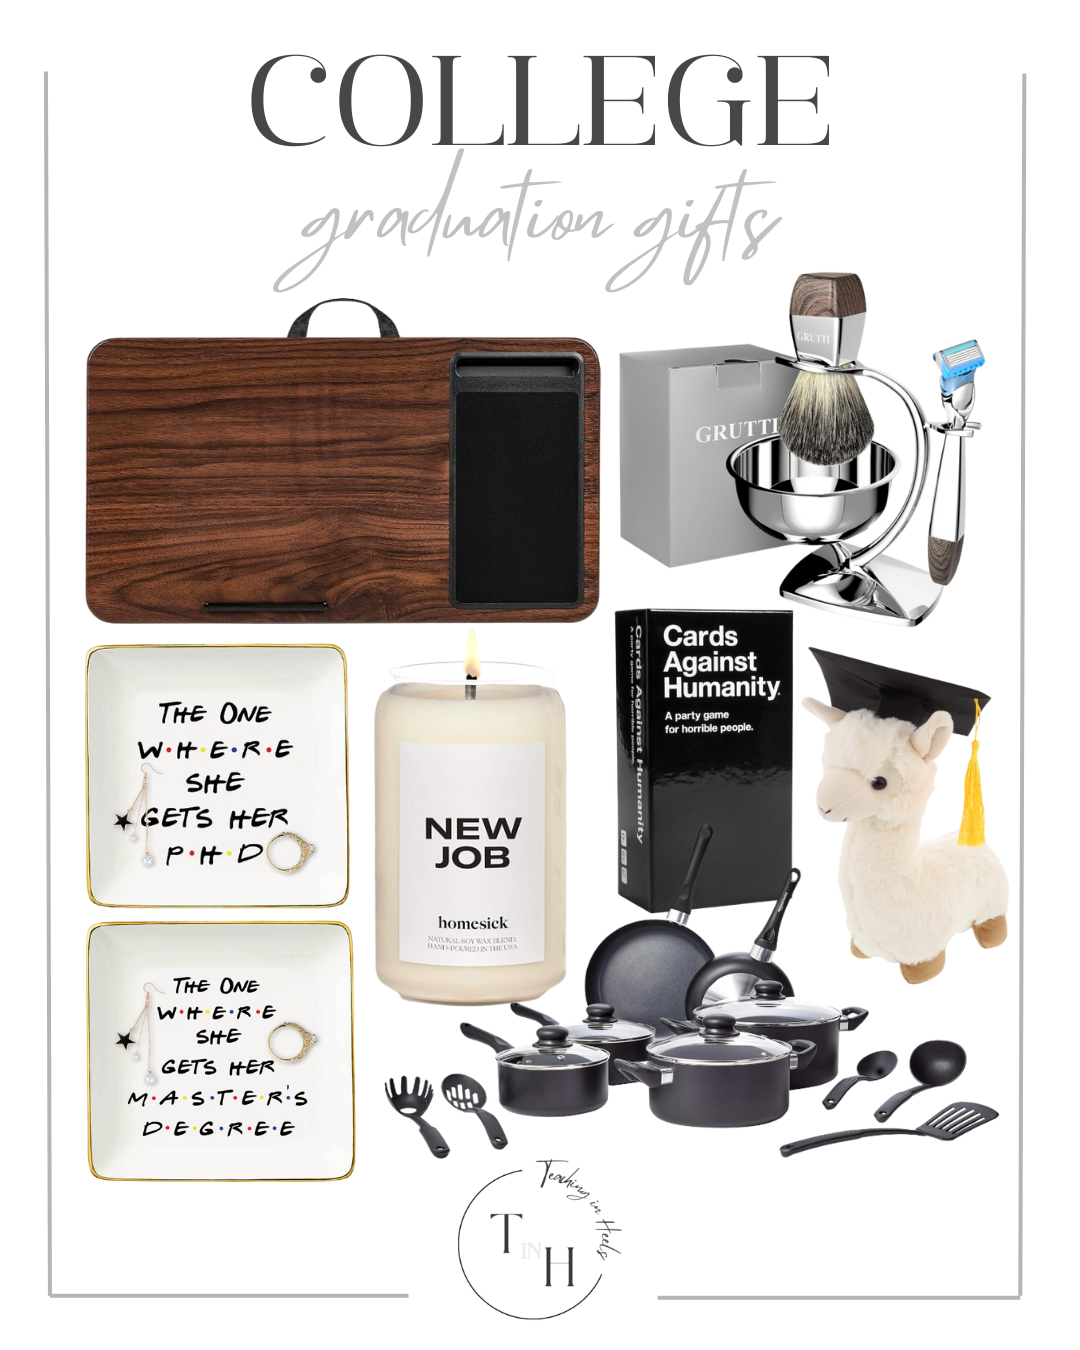 The Ultimate Graduation Gift Guide 2024

Graduation, graduation gifts, gift guide, gifts, grad gifts, seasonal gifts, college grad, college graduation gifts, card games, cookware set